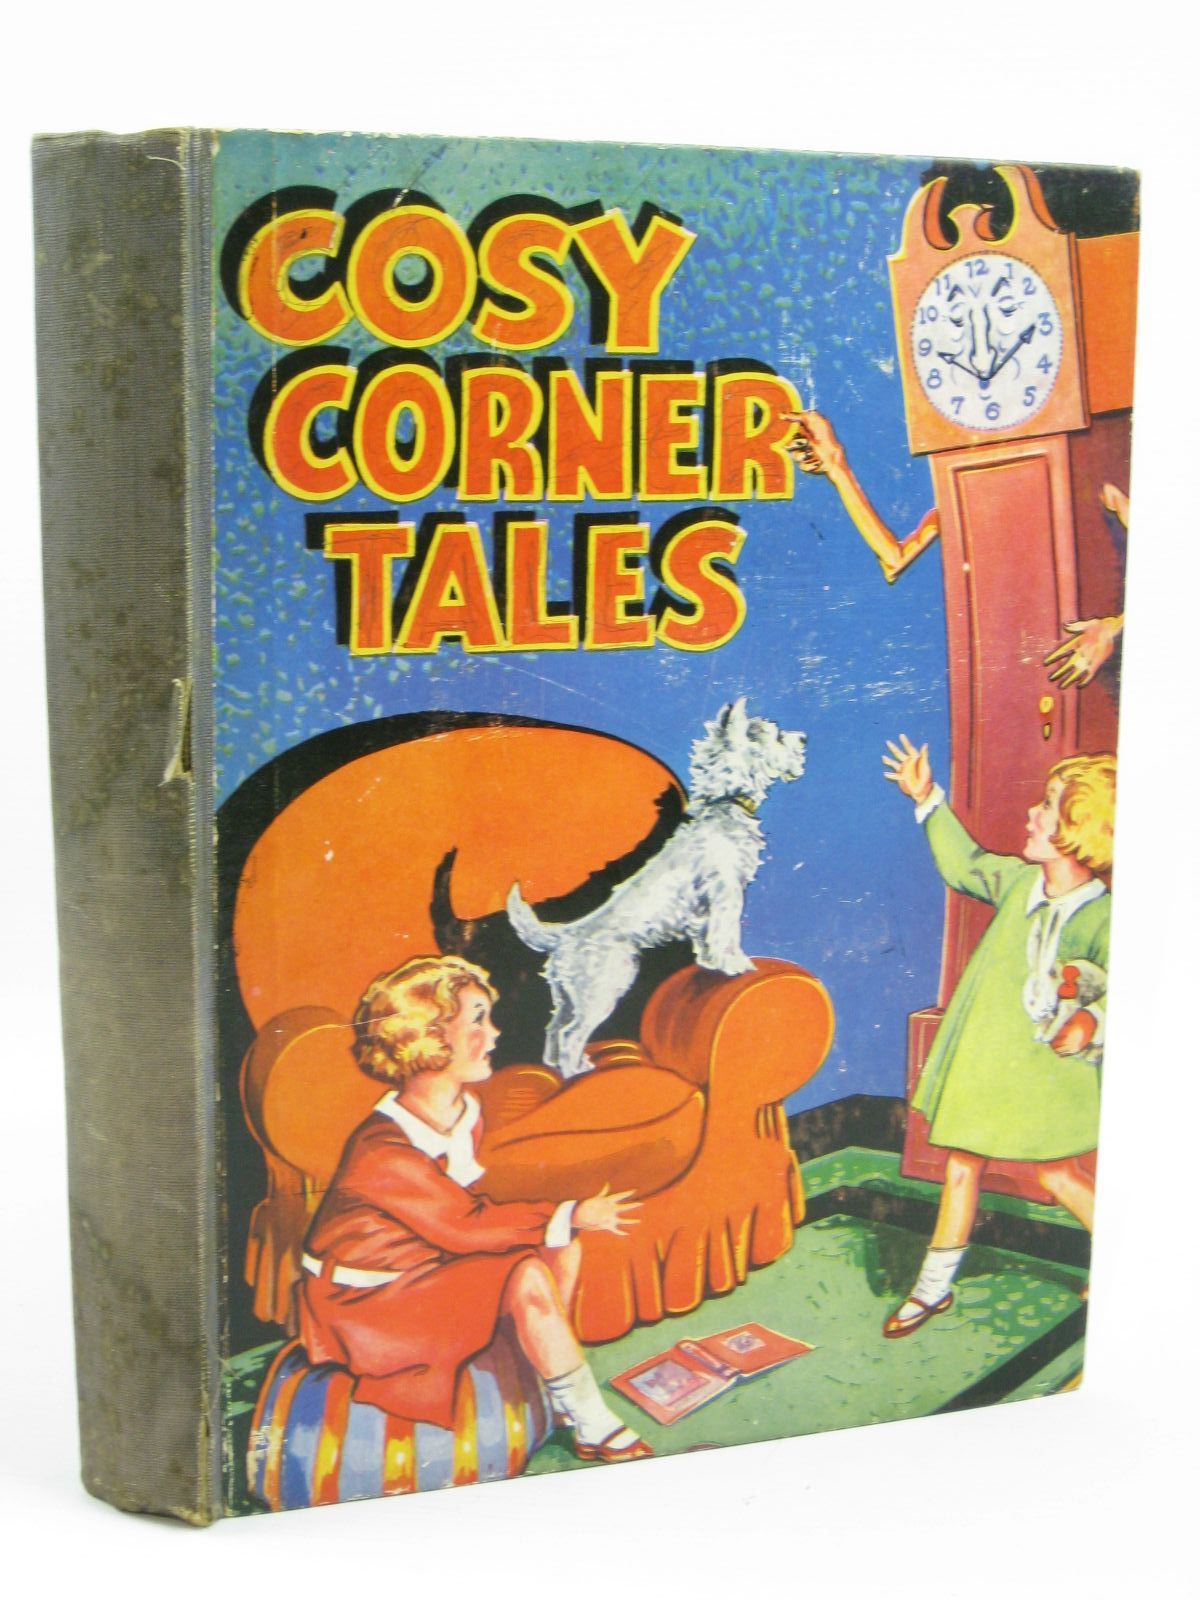 Photo of COSY CORNER TALES illustrated by Wain, Louis Robinson, Gordon Christie, G.F. et al., published by Wells Gardner, Darton &amp; Co. Ltd. (STOCK CODE: 1506852)  for sale by Stella & Rose's Books